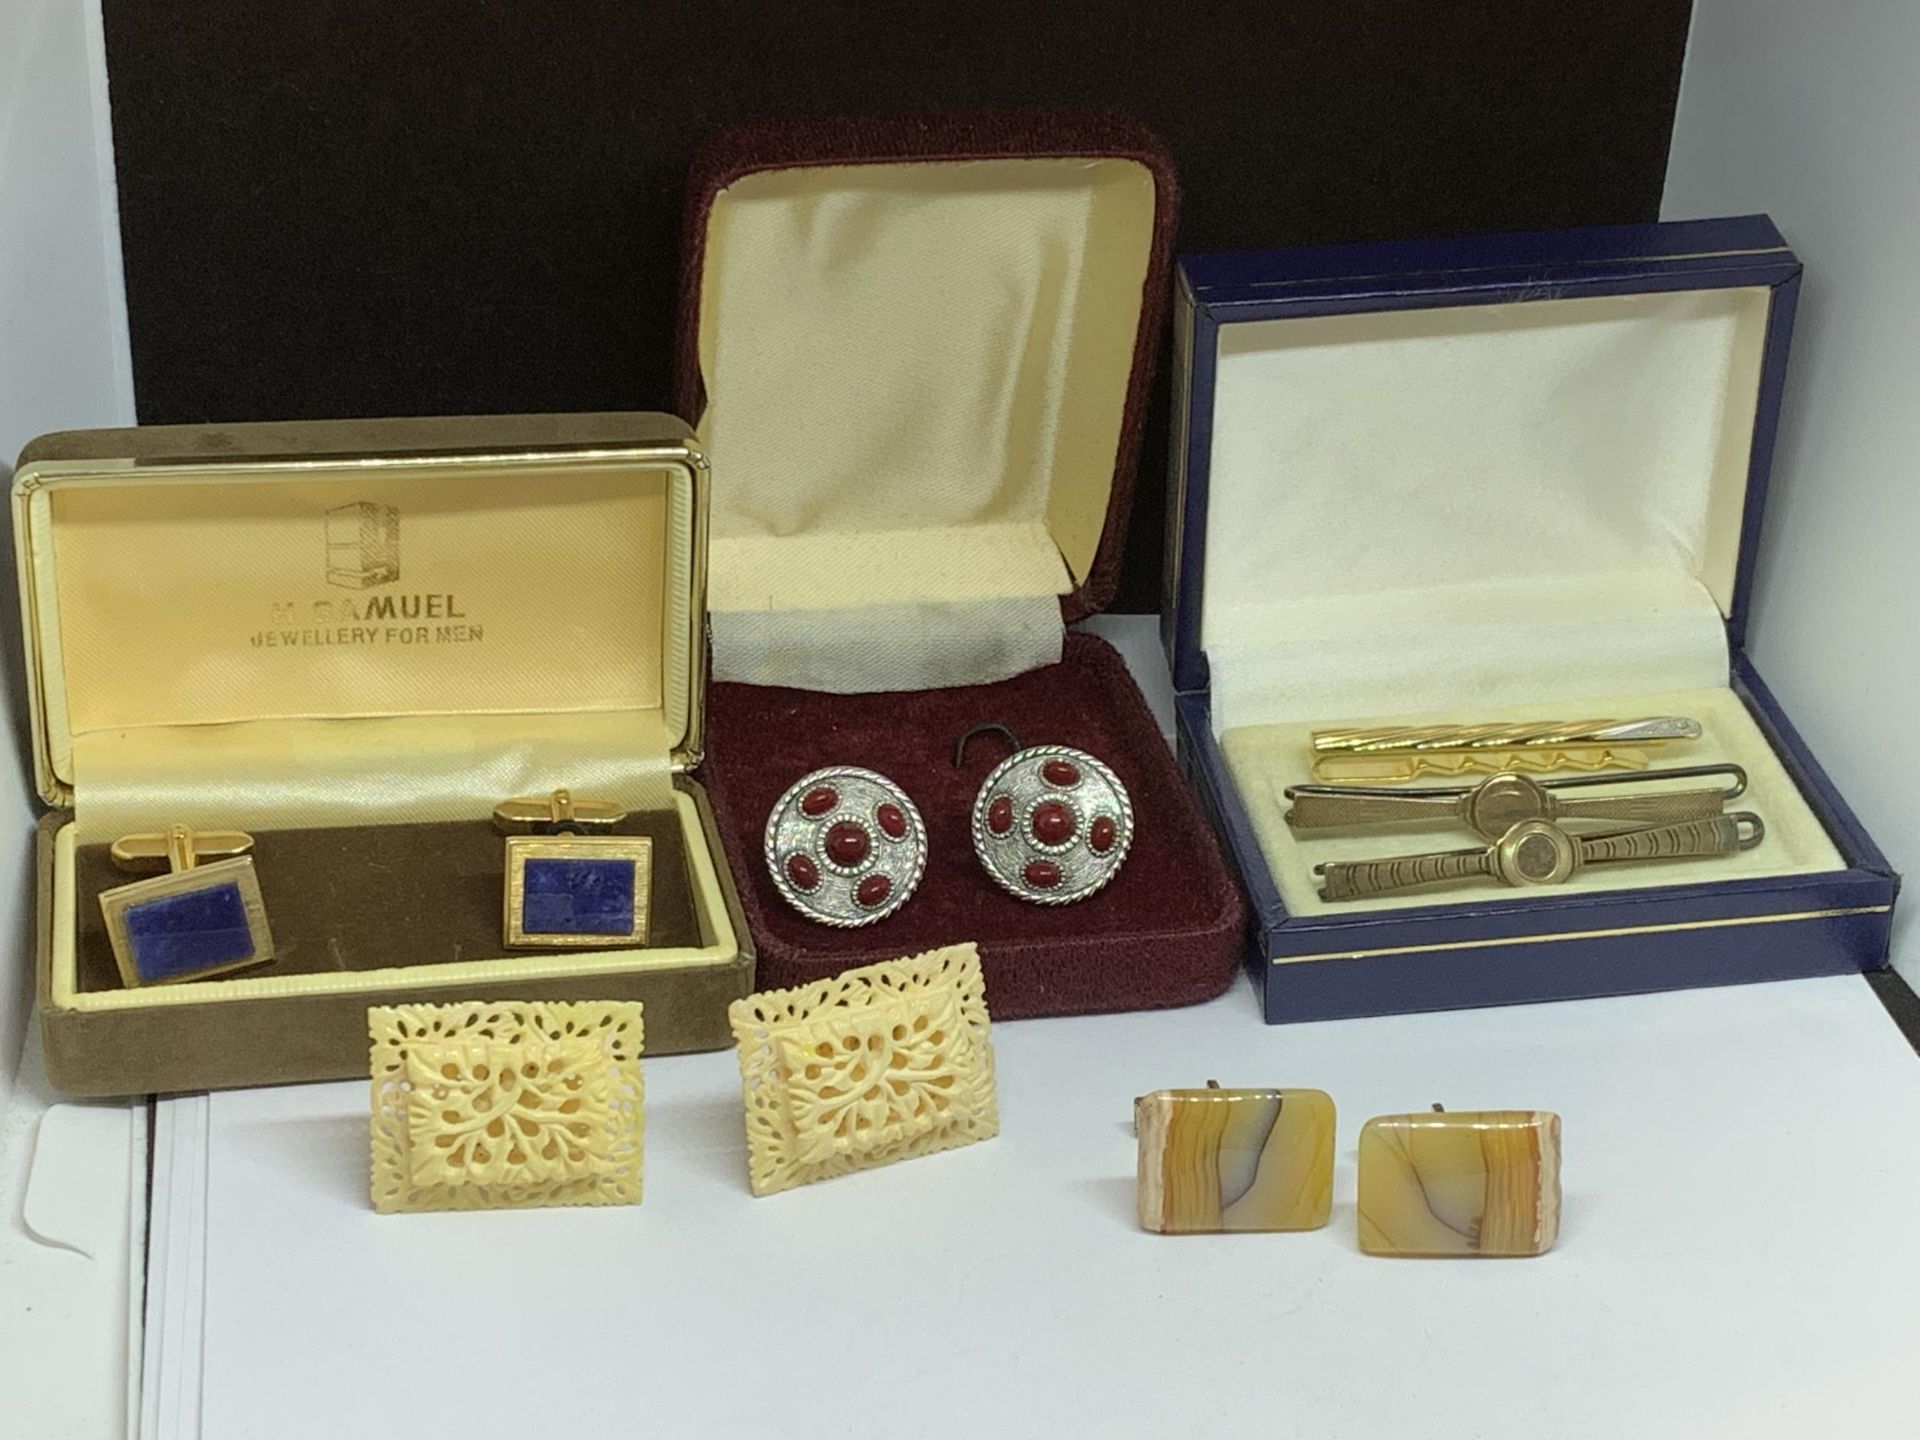 FOUR PAIRS OF CUFFLINKS TO INCLUDE A CARVED BONE PAIR AND THREE TIE PINS WITH A SILVER EXAMPLE IN